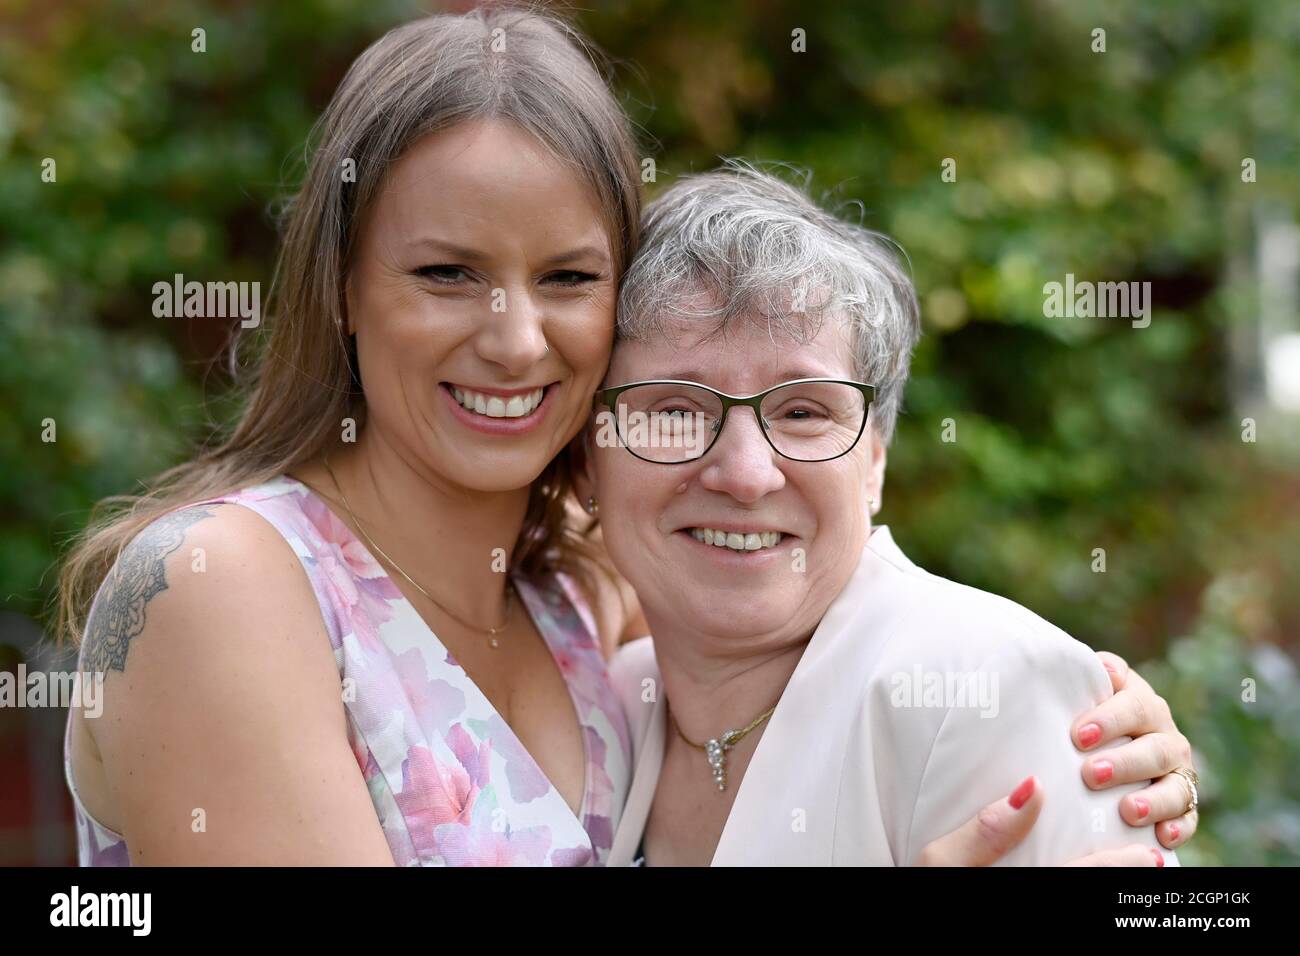 Young woman and older woman embrace each other, Generations, Karsruhe, Baden-Wuerttemberg, Germany Stock Photo